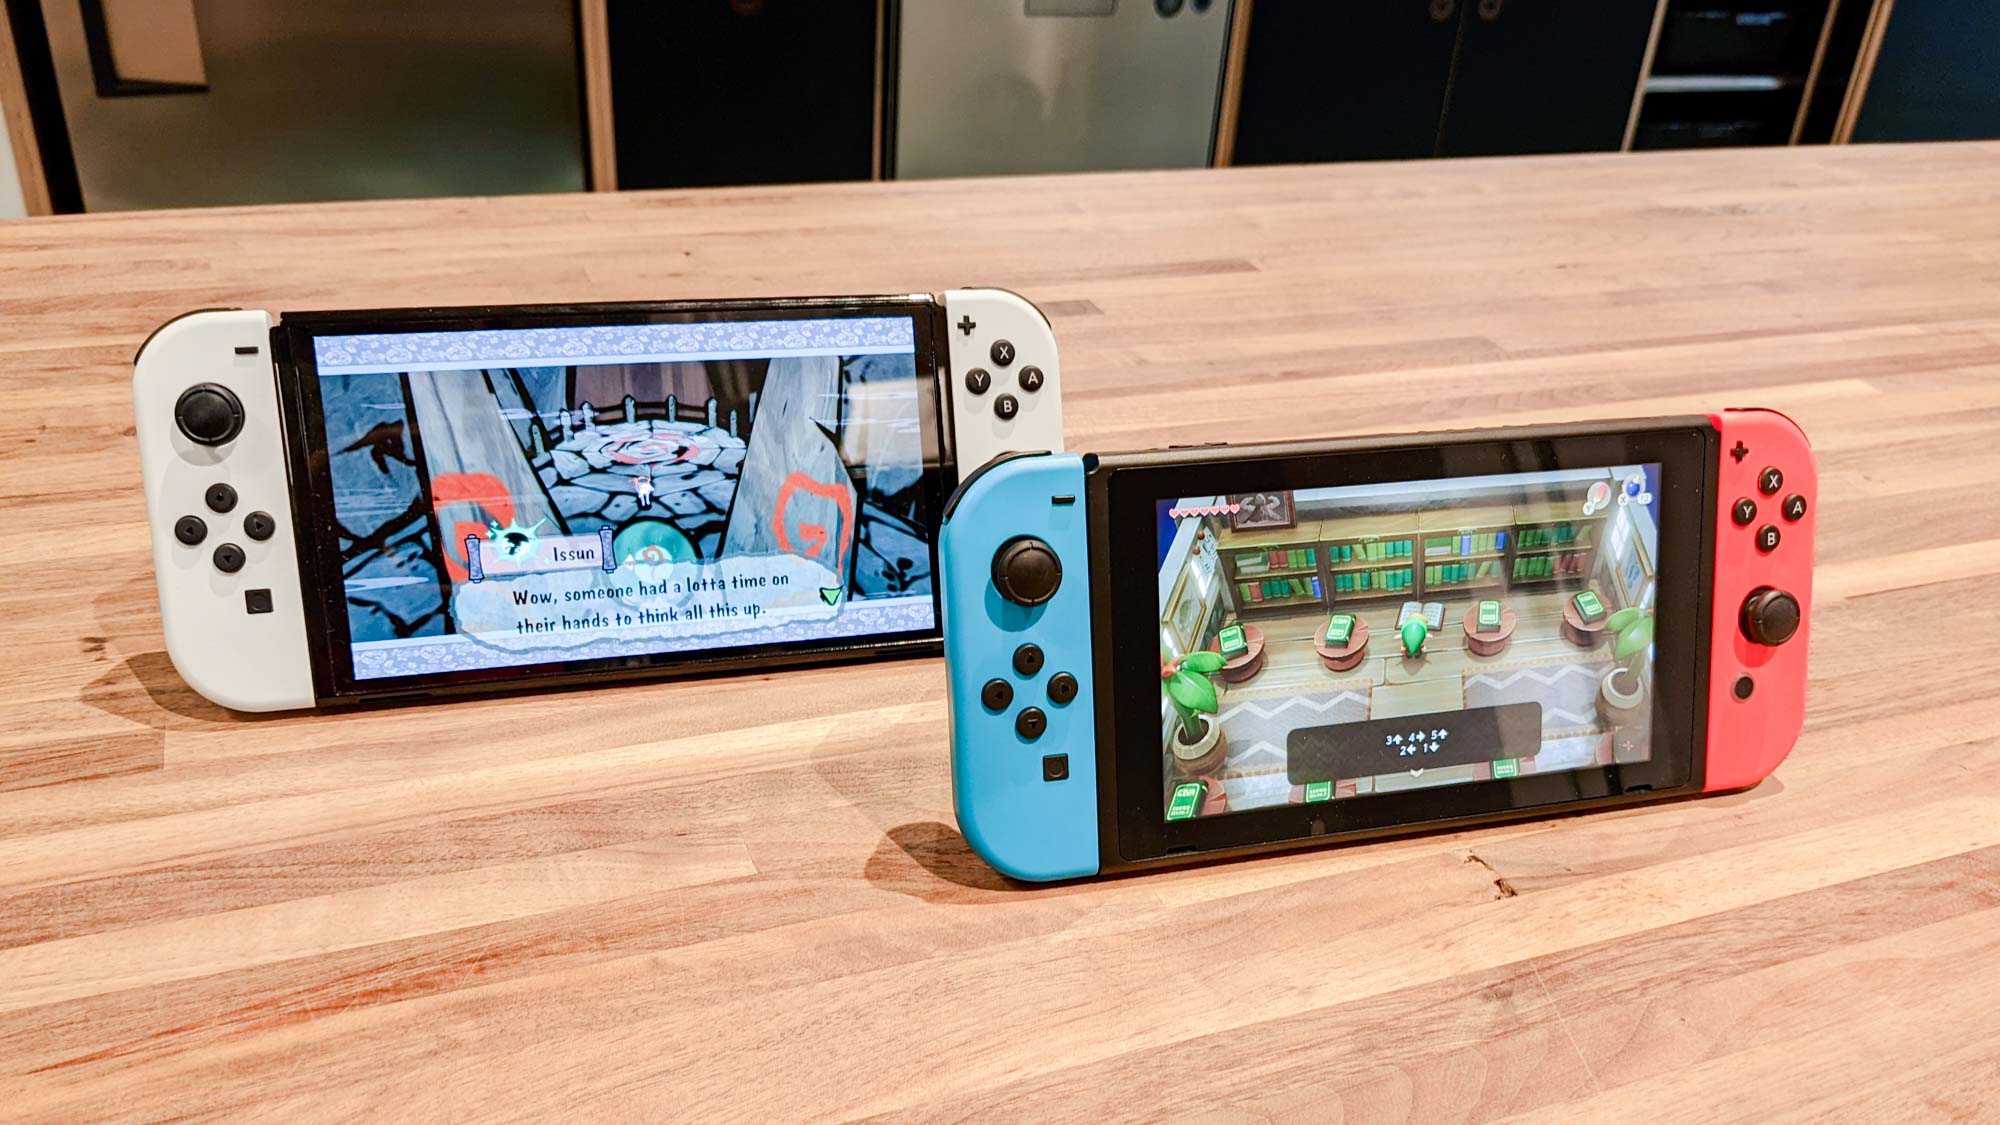 Old vs New Switch: What Nintendo didn't tell you 